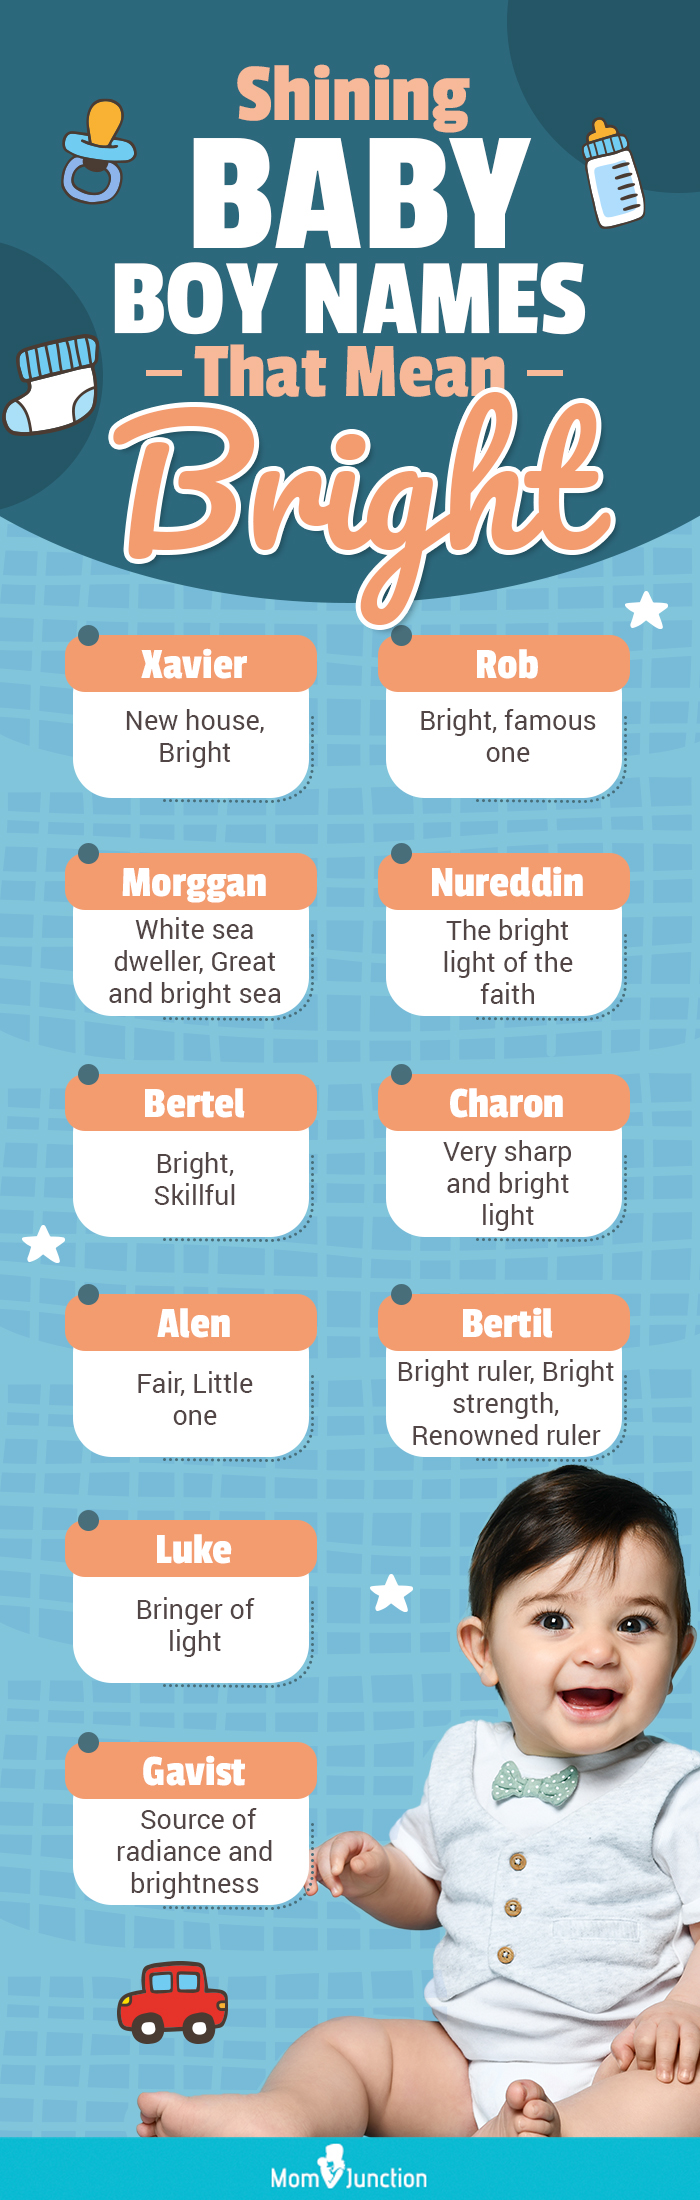 shining baby boy names that mean bright (infographic)